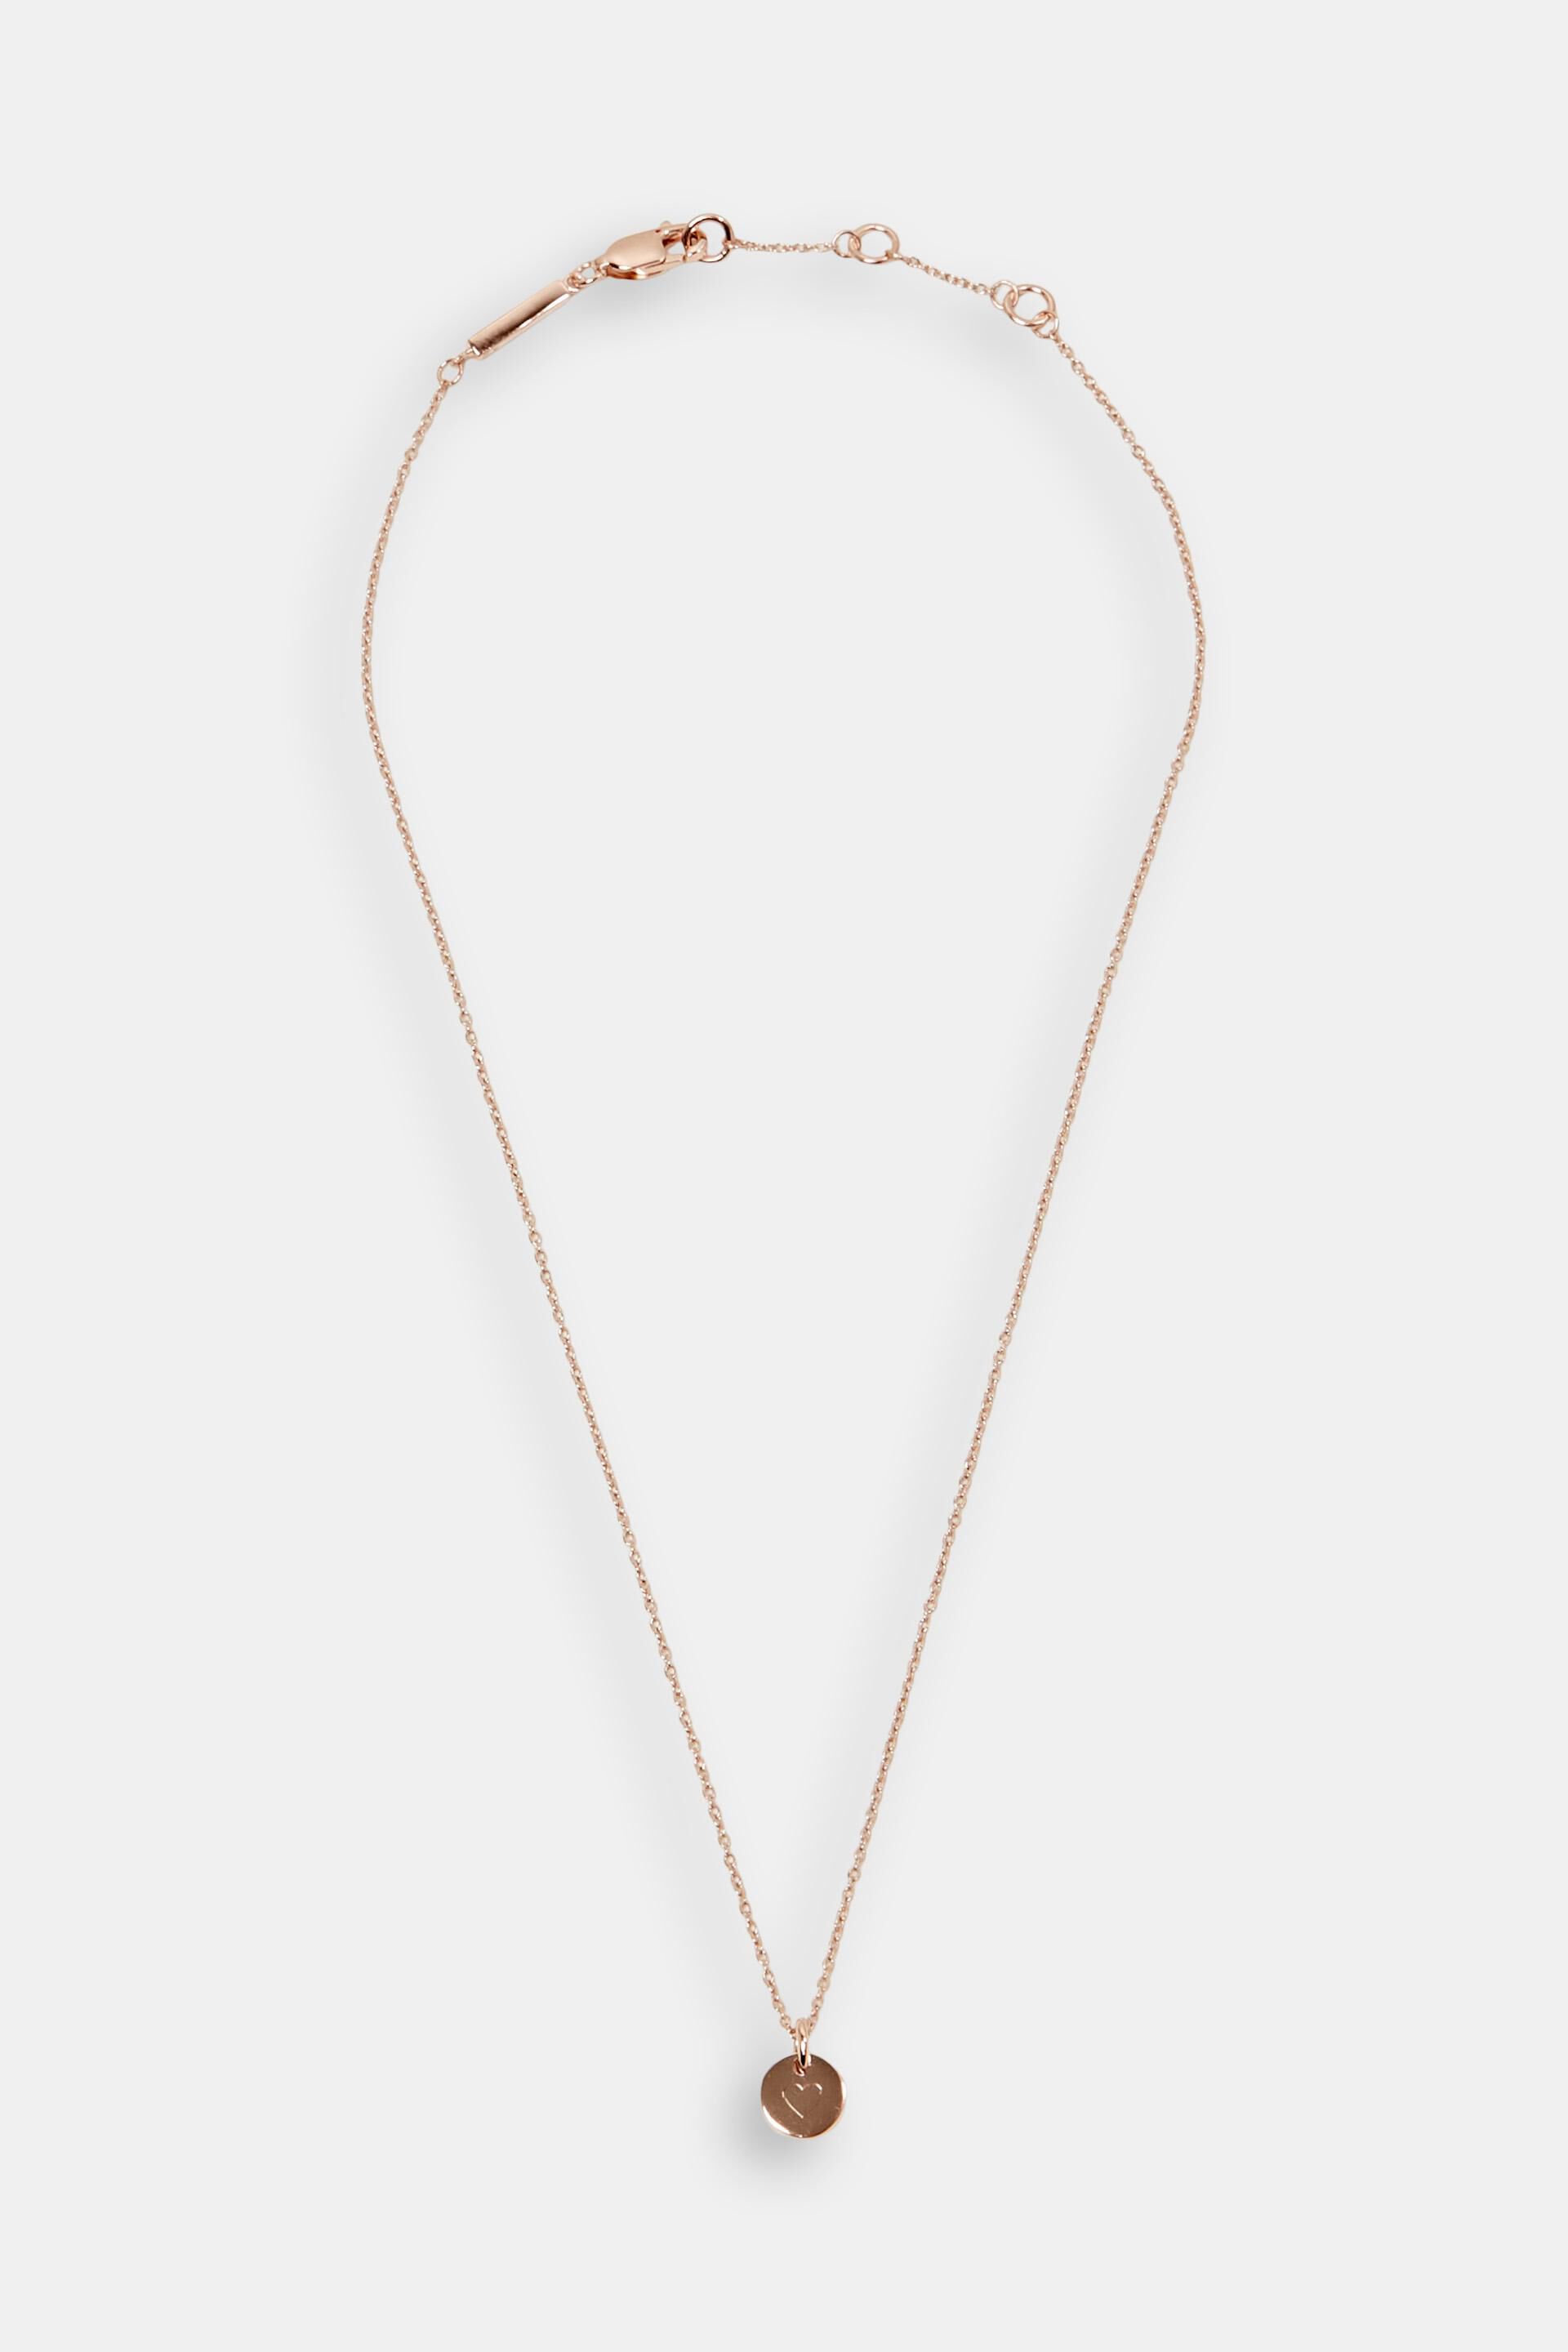 Yellow Gold Vermeil Engraved Heart Necklace - The Perfect Keepsake Gift